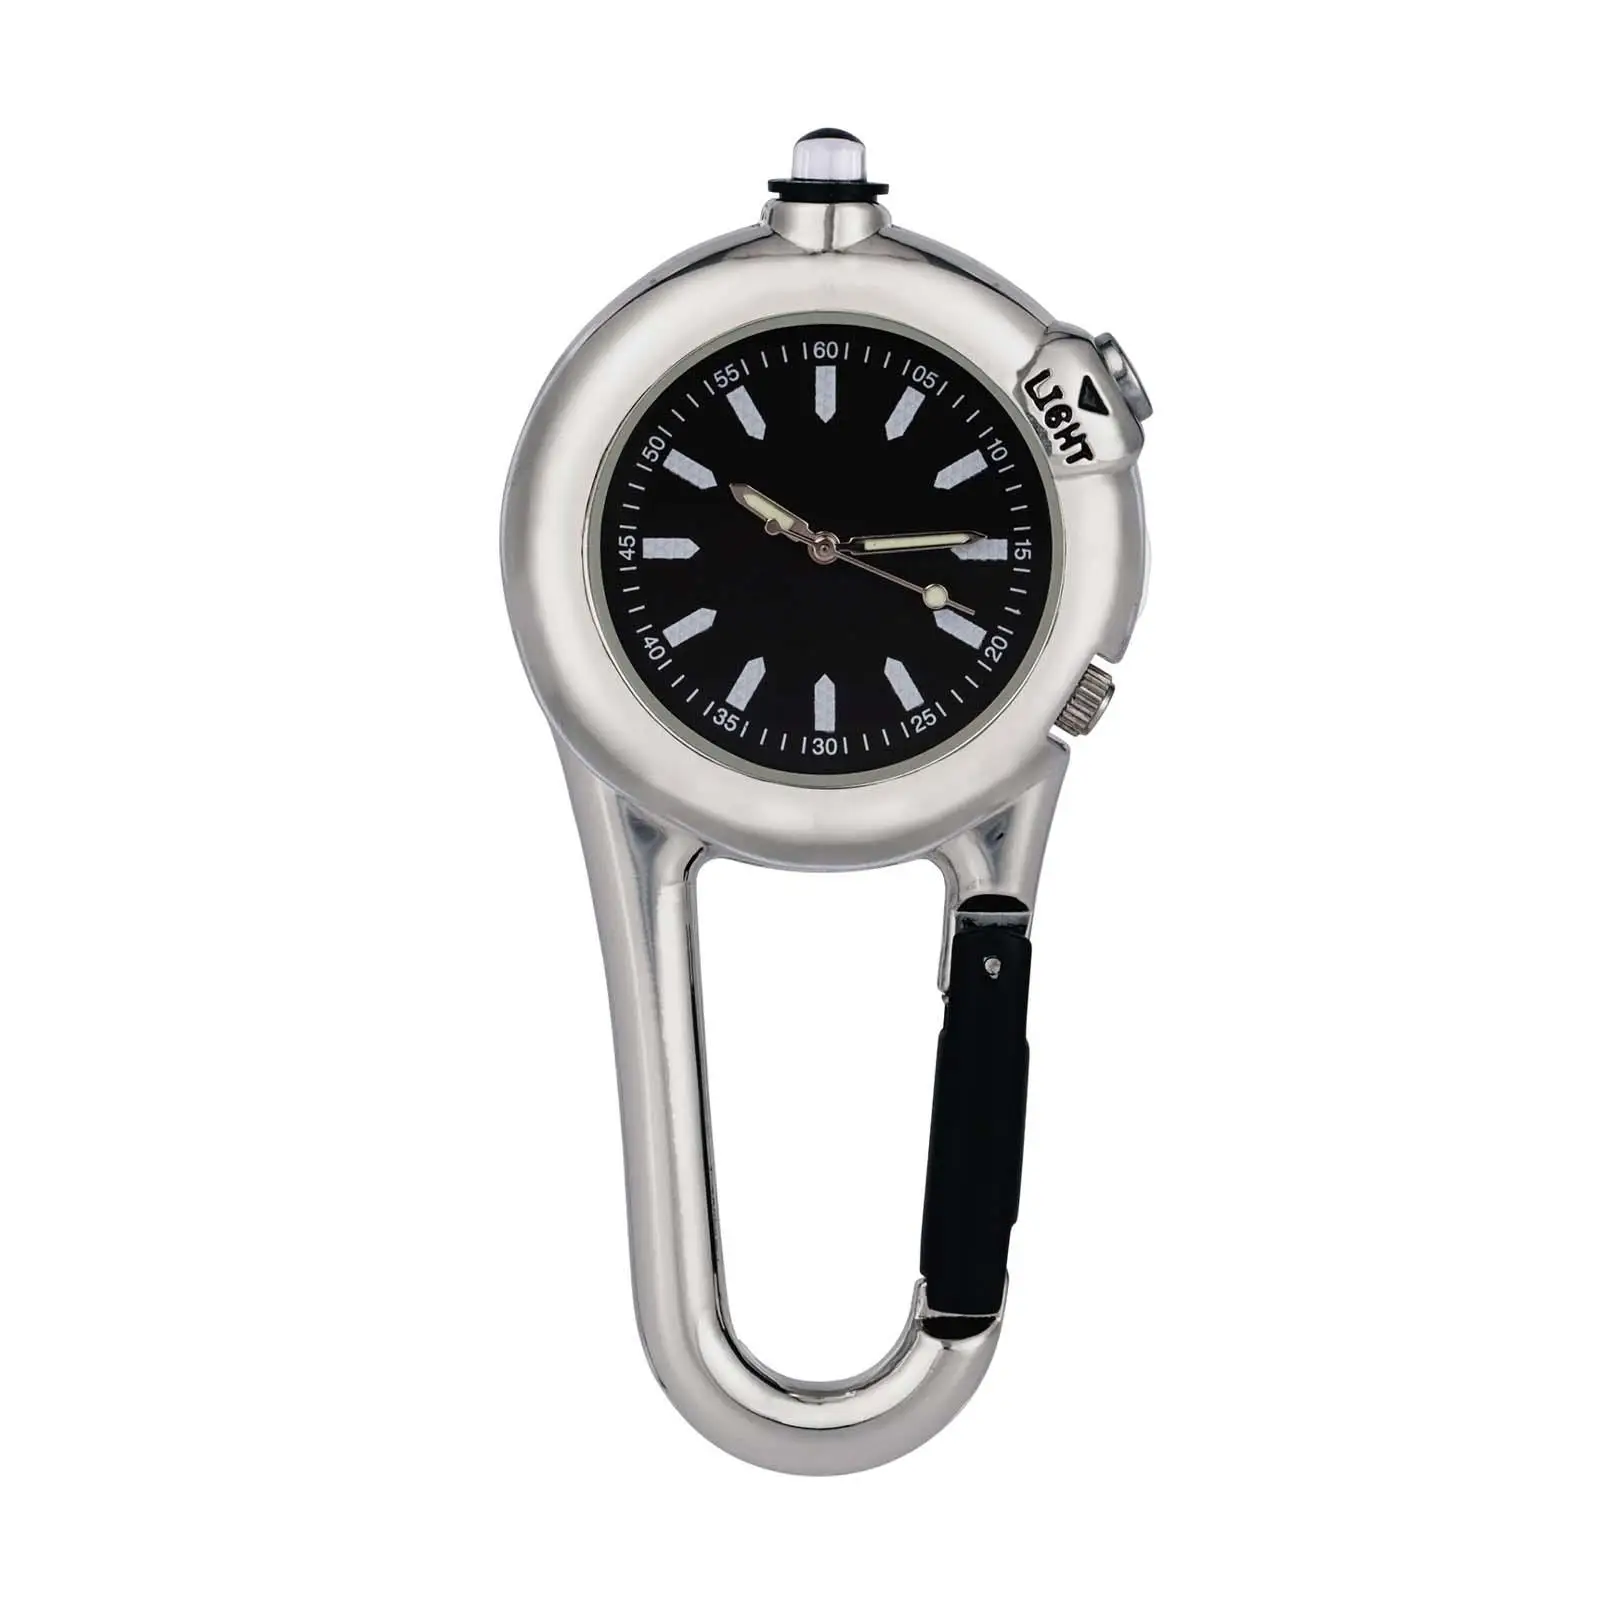 Mini Clip On Carabiner Pocket Watch Backpack Watch Unisex Luminous with Light Climbing Watch for Outdoor Camping Gear